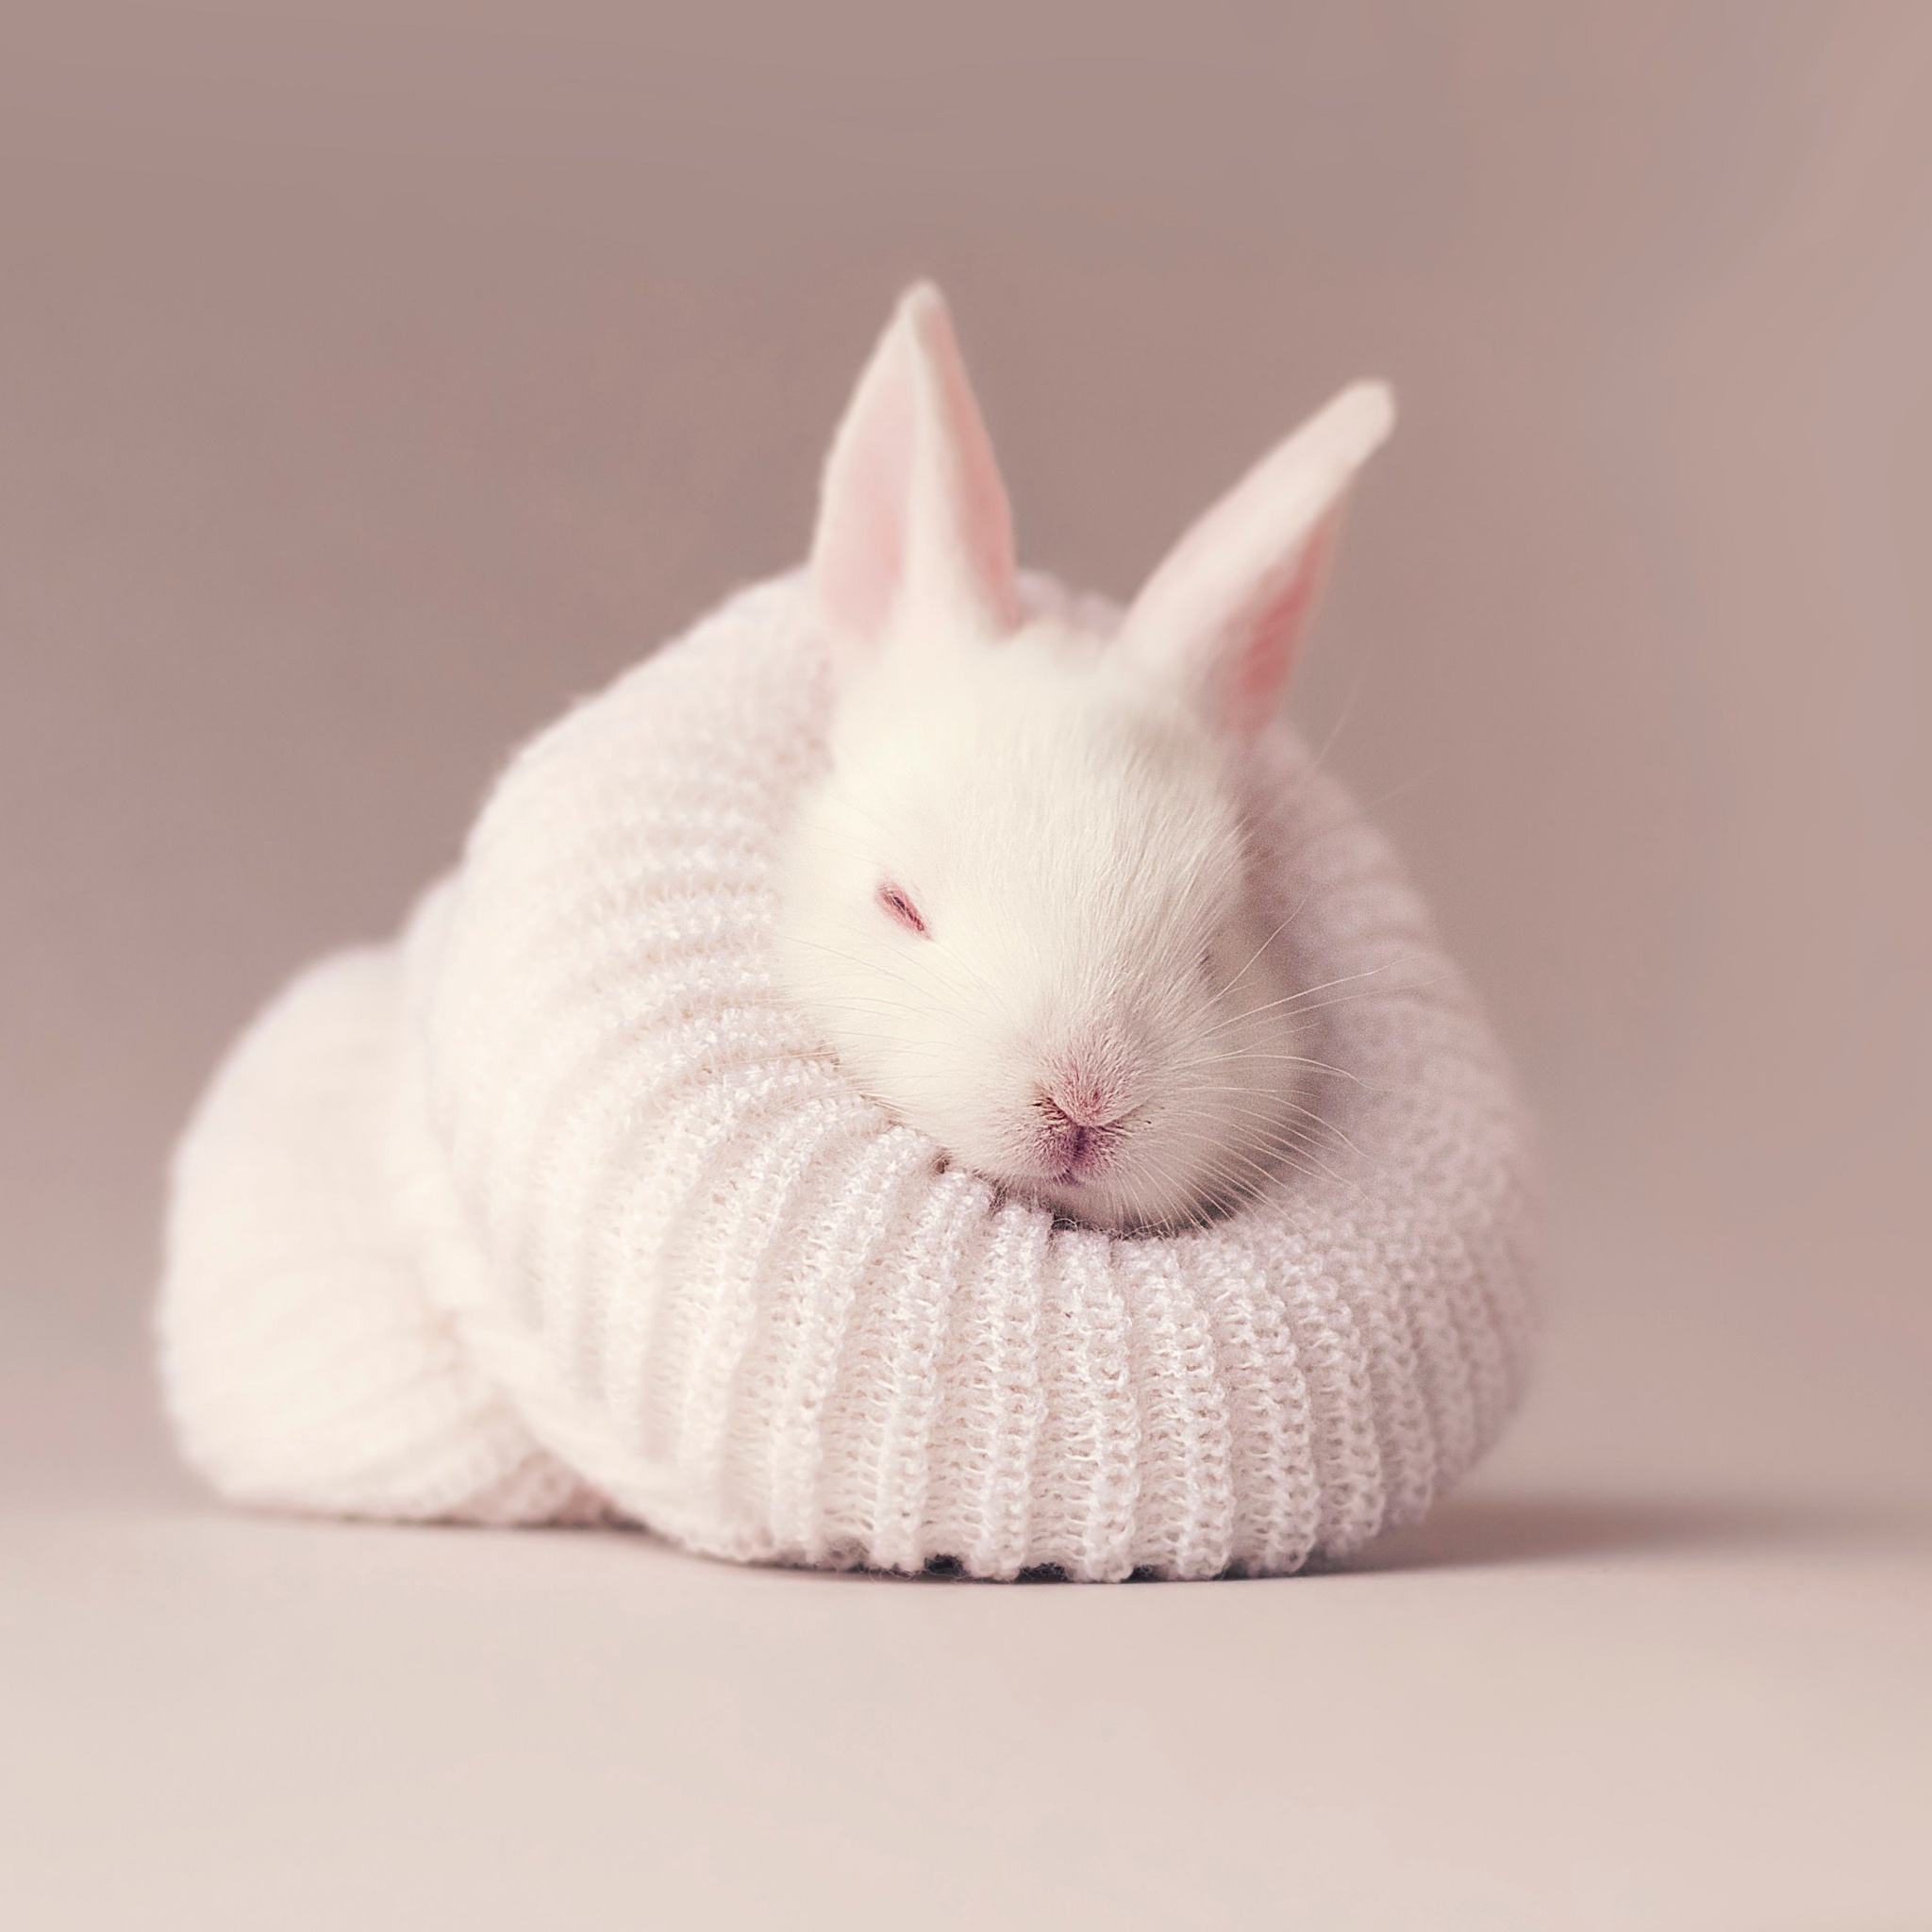 A white rabbit wrapped in a white cable knit sweater. - Cute white